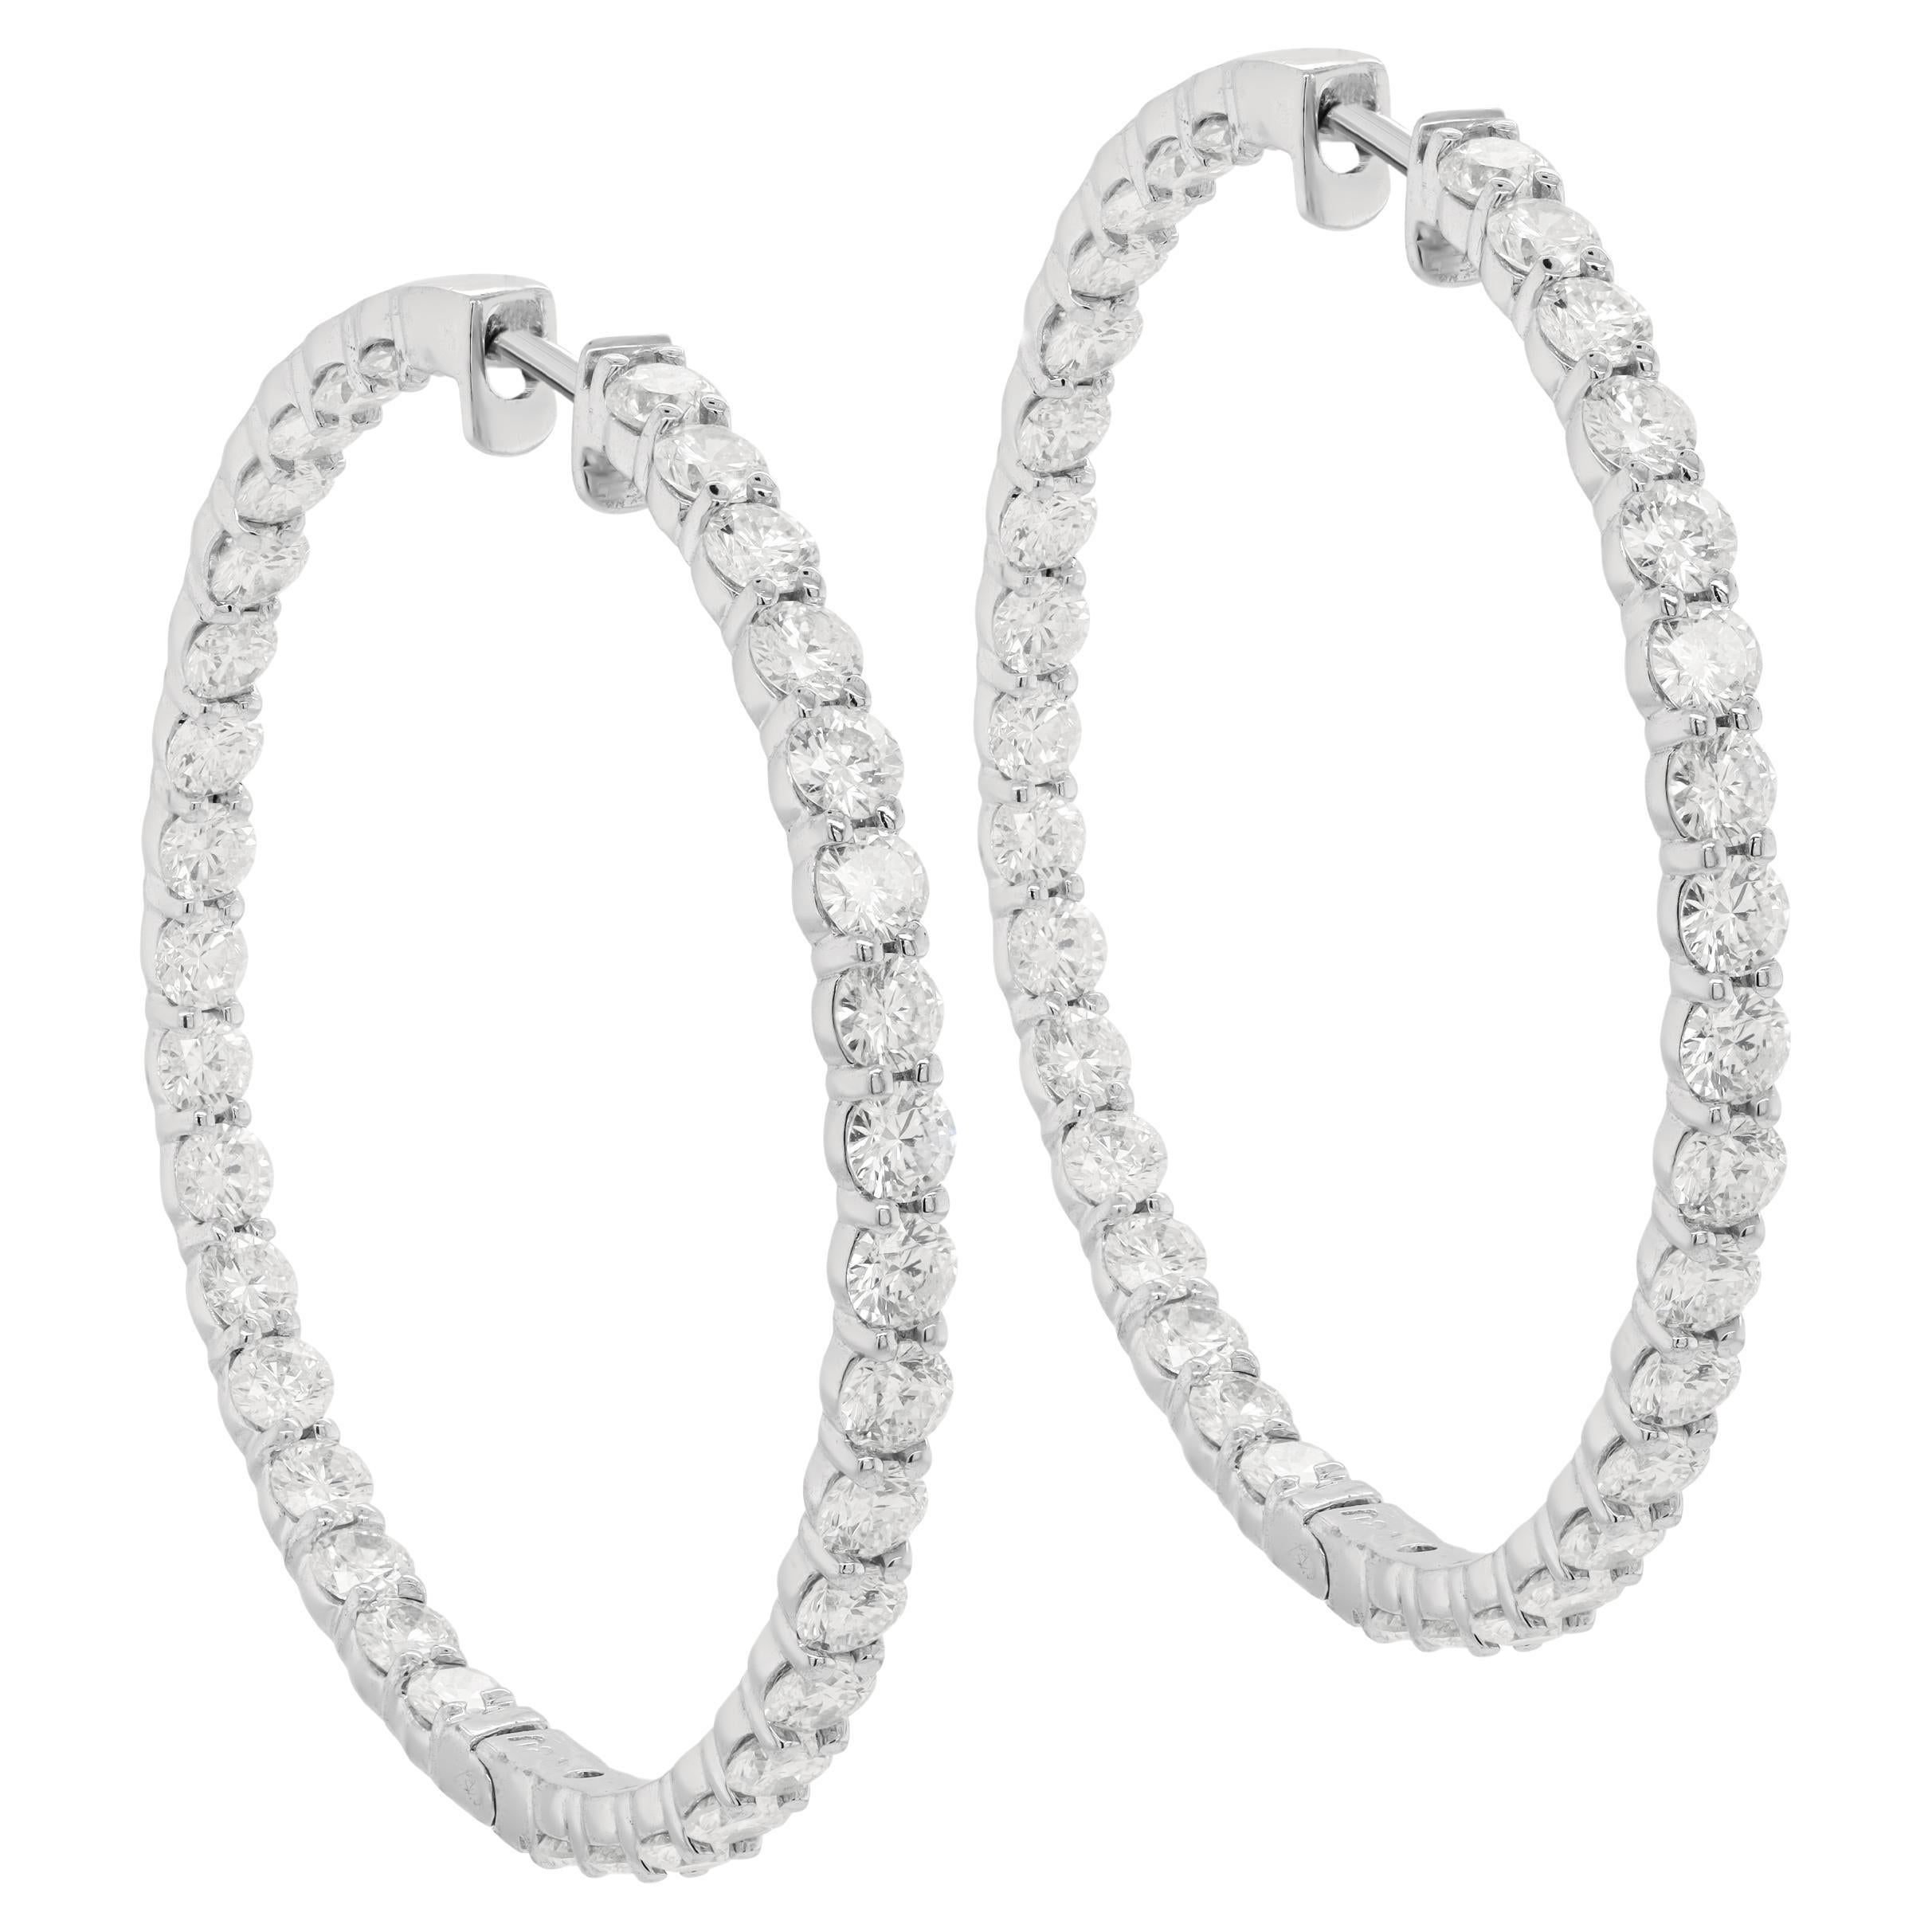 Diana M. 14 kt white gold, 2.00" inside-out hoop earrings adorned with 9.45 cts 